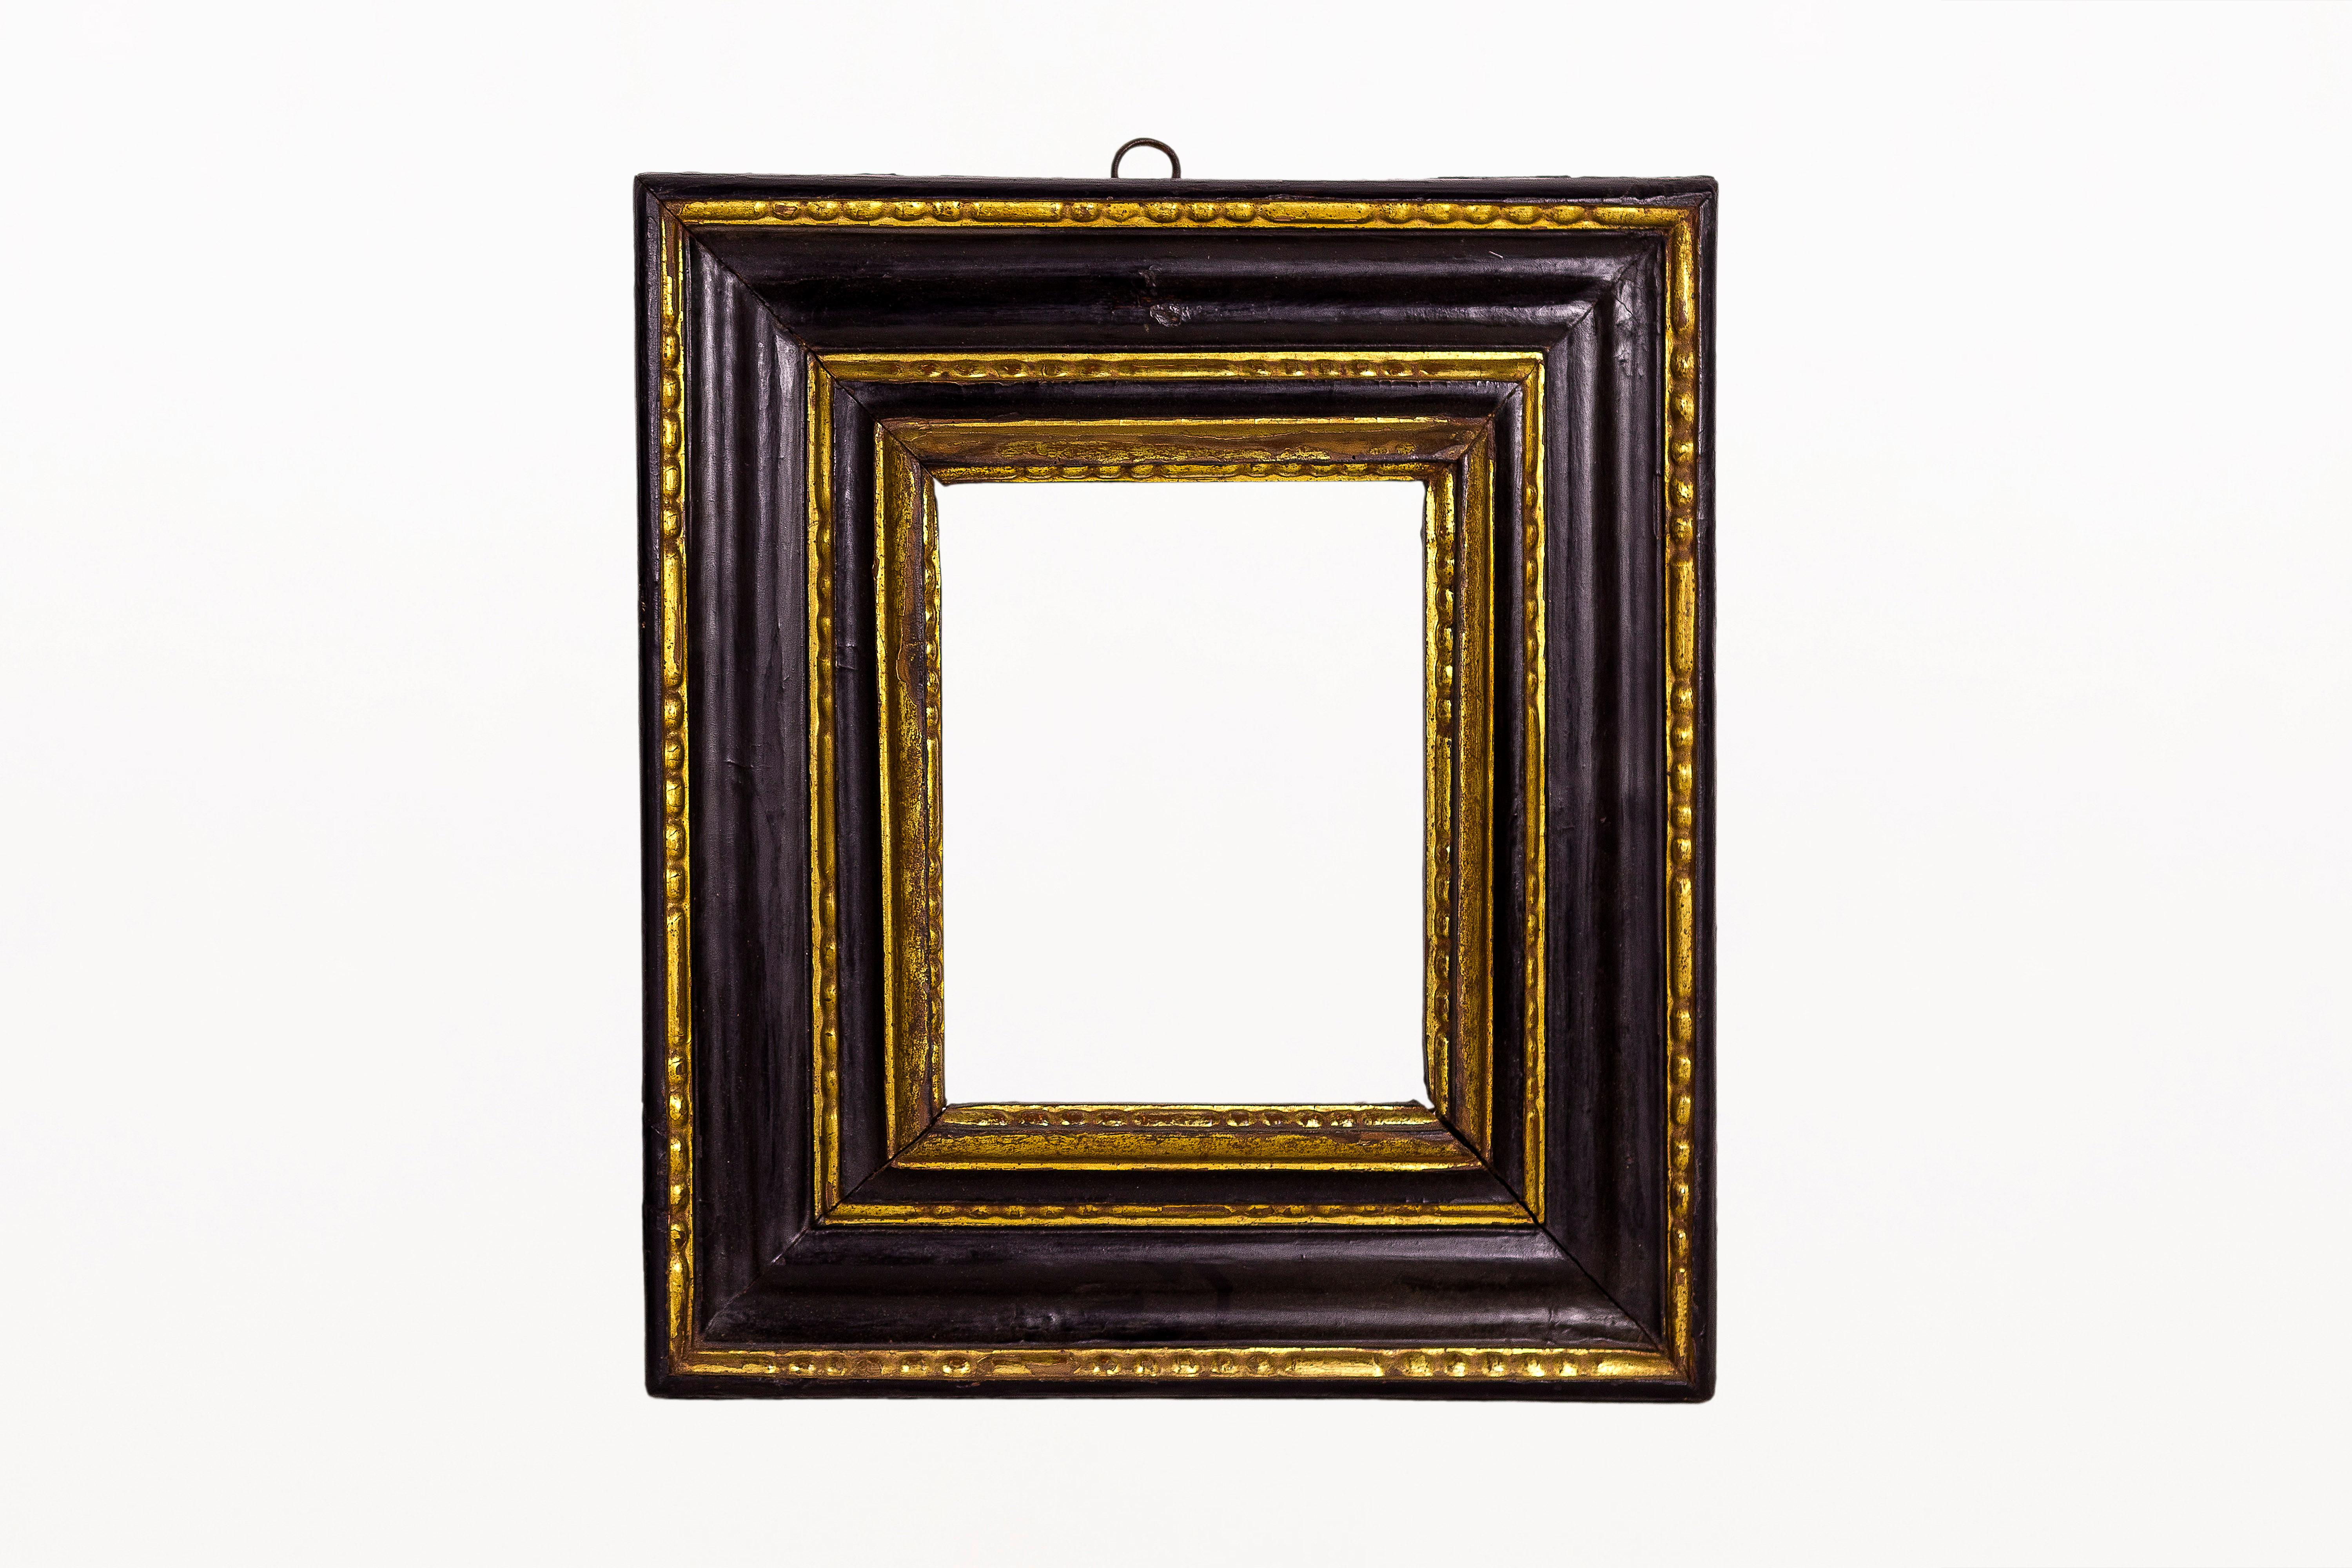 Pair of 18th century, ebonized and gilt frames.
Ebonized wood and gilt
18th century, Spain
Good vintage condition.